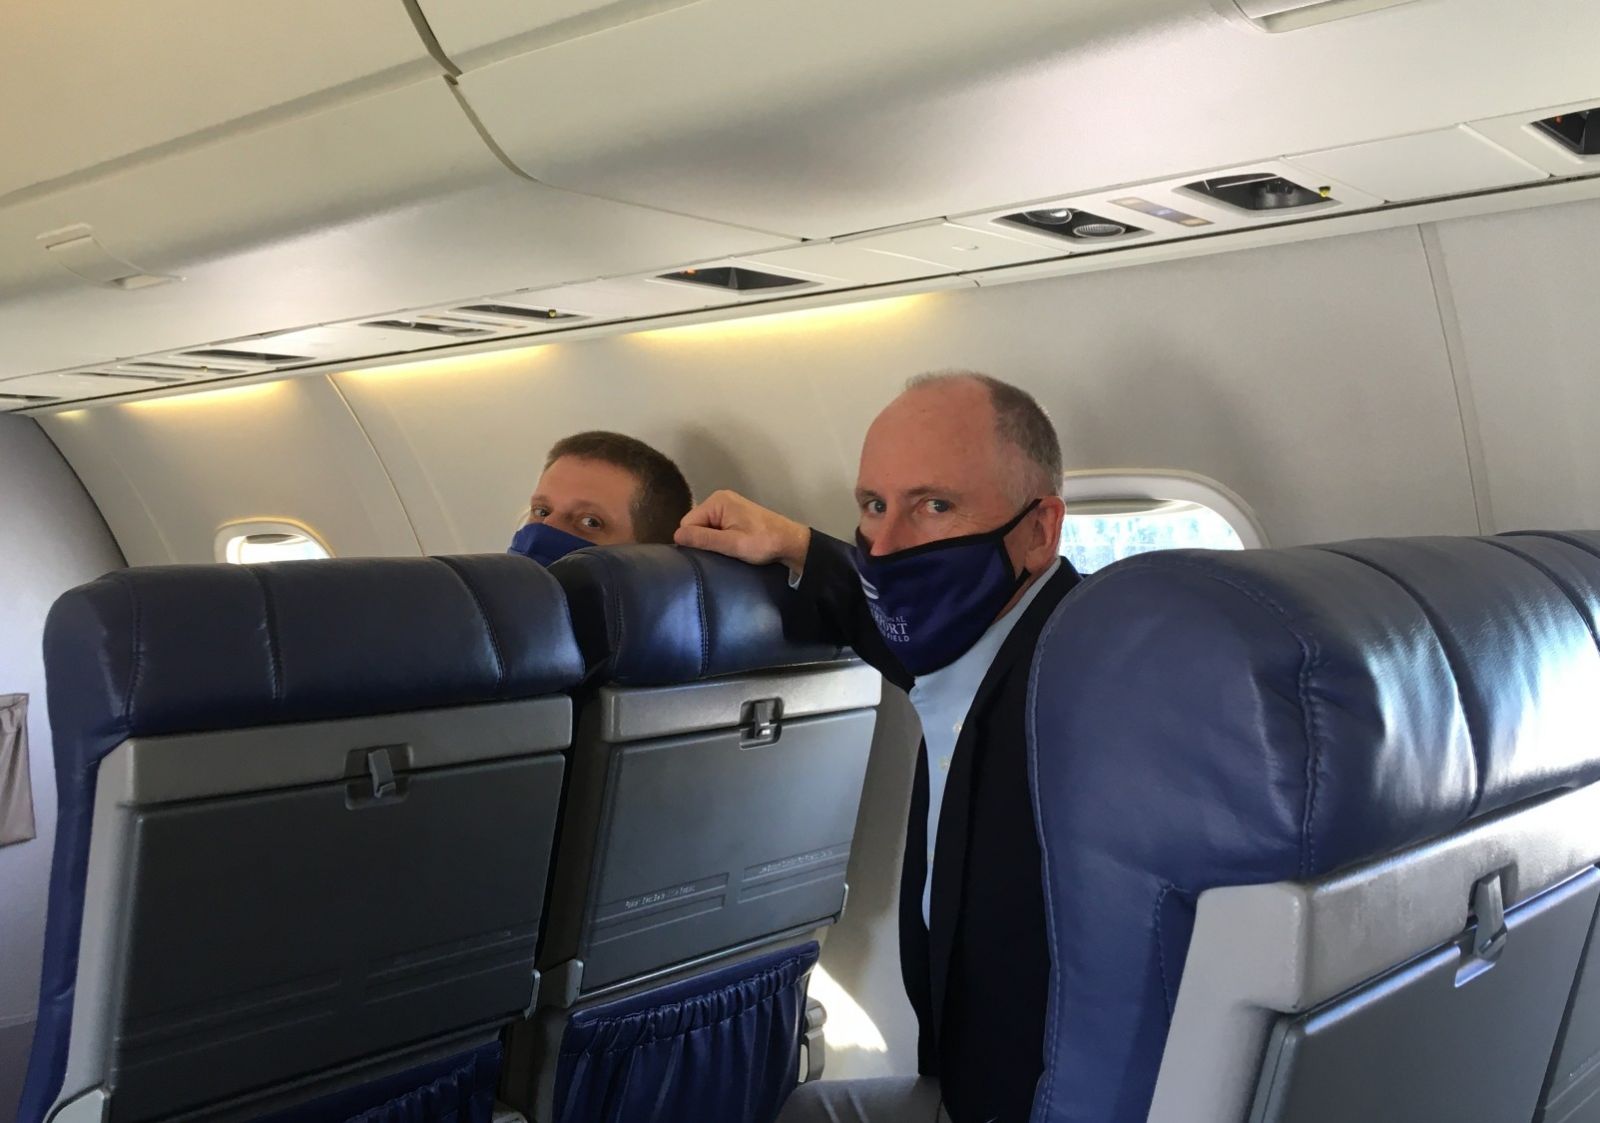 GSP CEO Dave Edwards and Scott Carr, vice president of commercial business and communications, try out the new seats on a tour of the Embraer jet. (Photo/Molly Hulsey) 